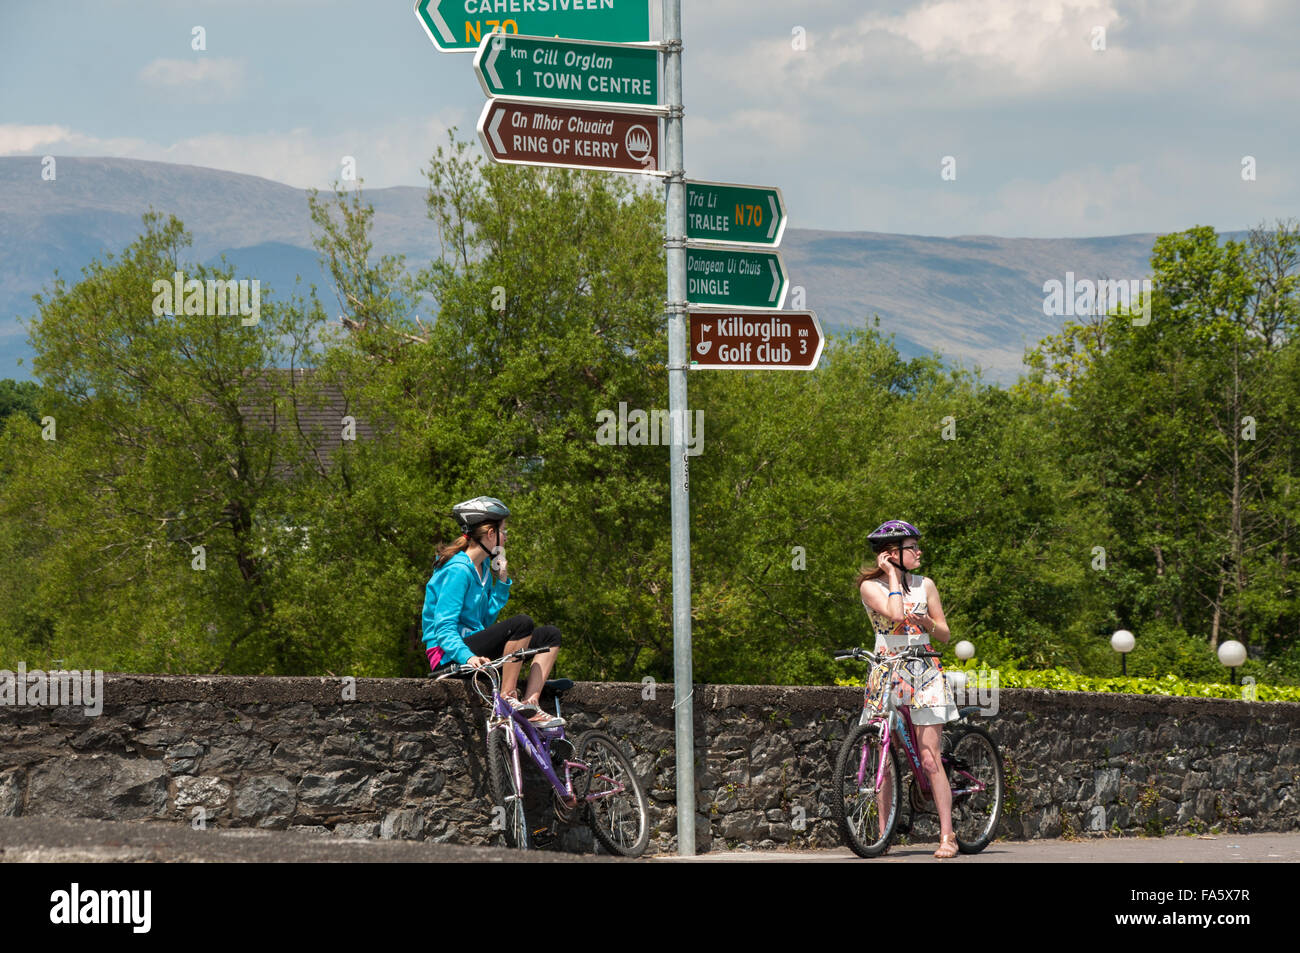 Two young women with helmets and bicycles wondering about the direction at crossroad. Road direction signs in English and Irish. Cycling in Ireland. Stock Photo